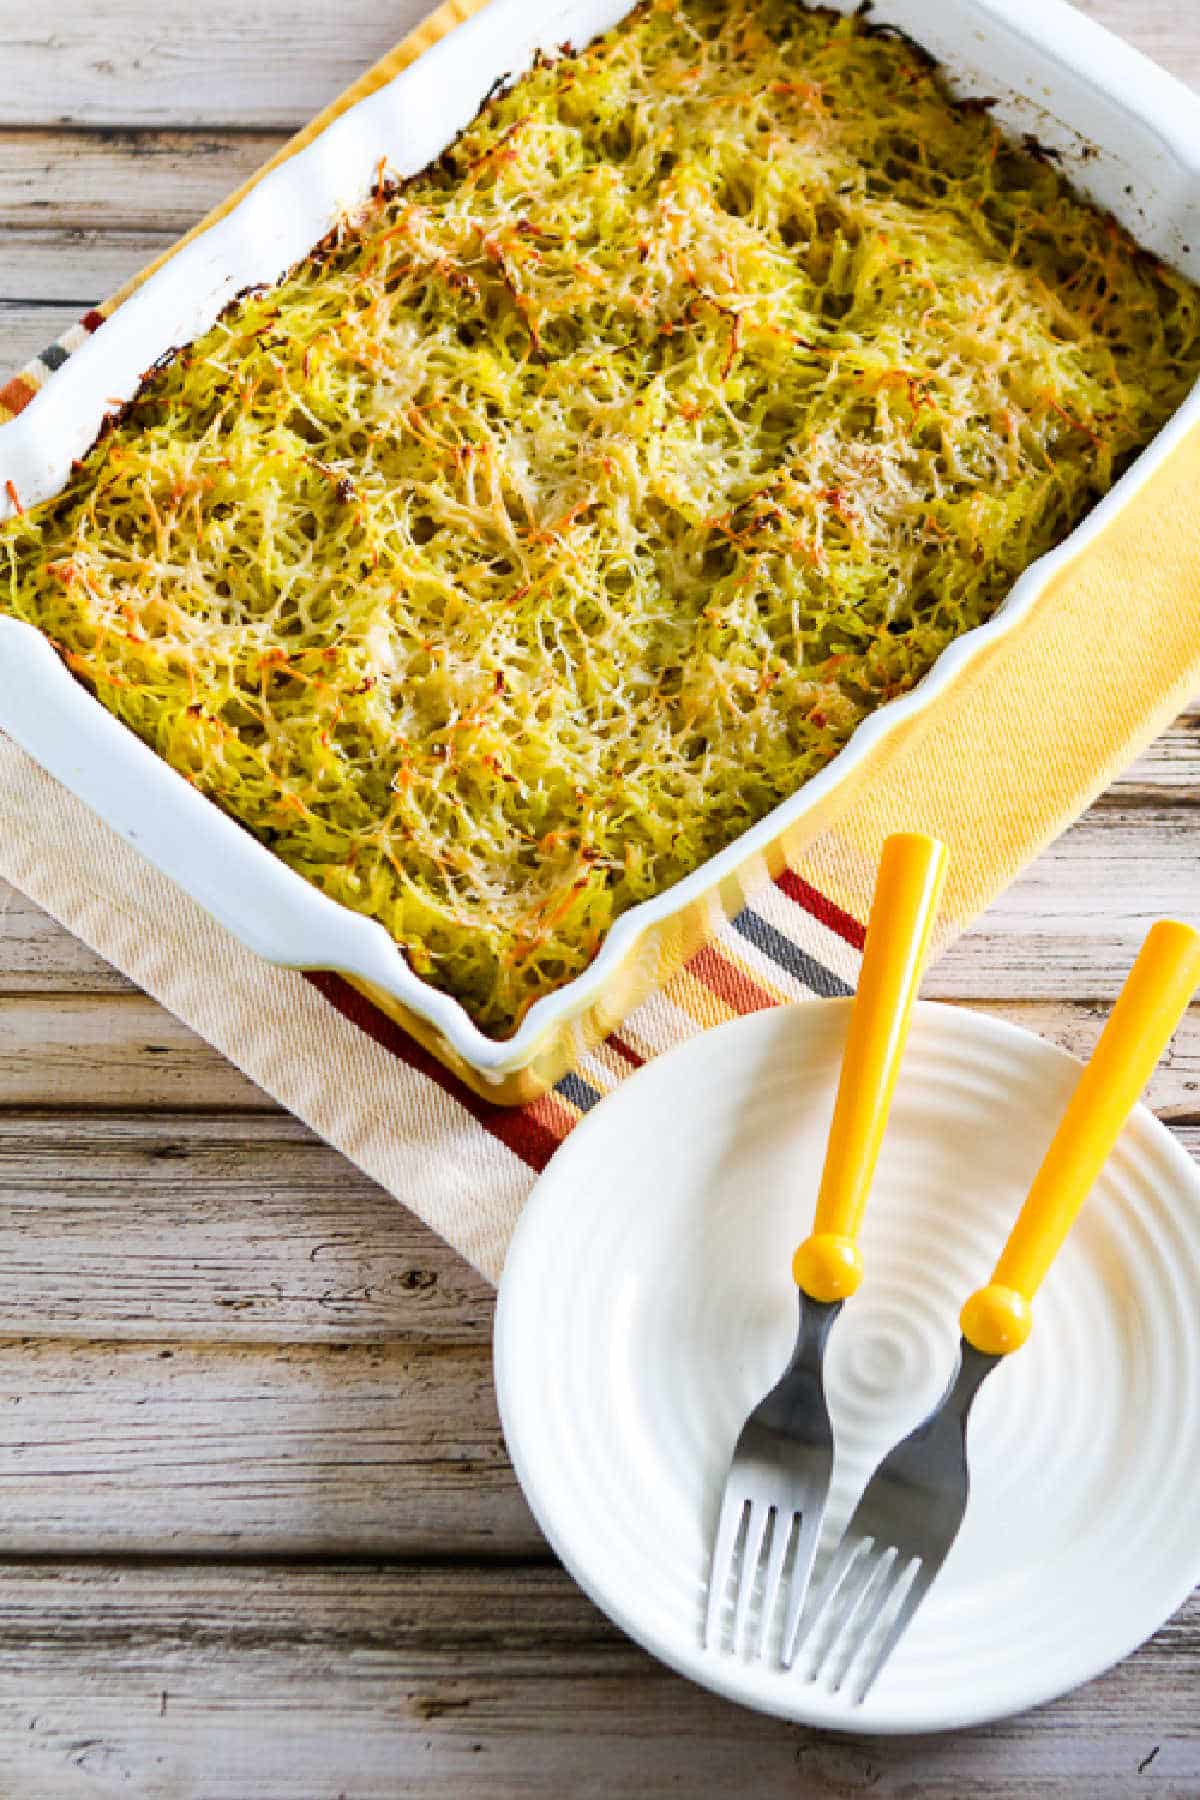 spaghetti squash baked with pesto in serving dish with plates and forks